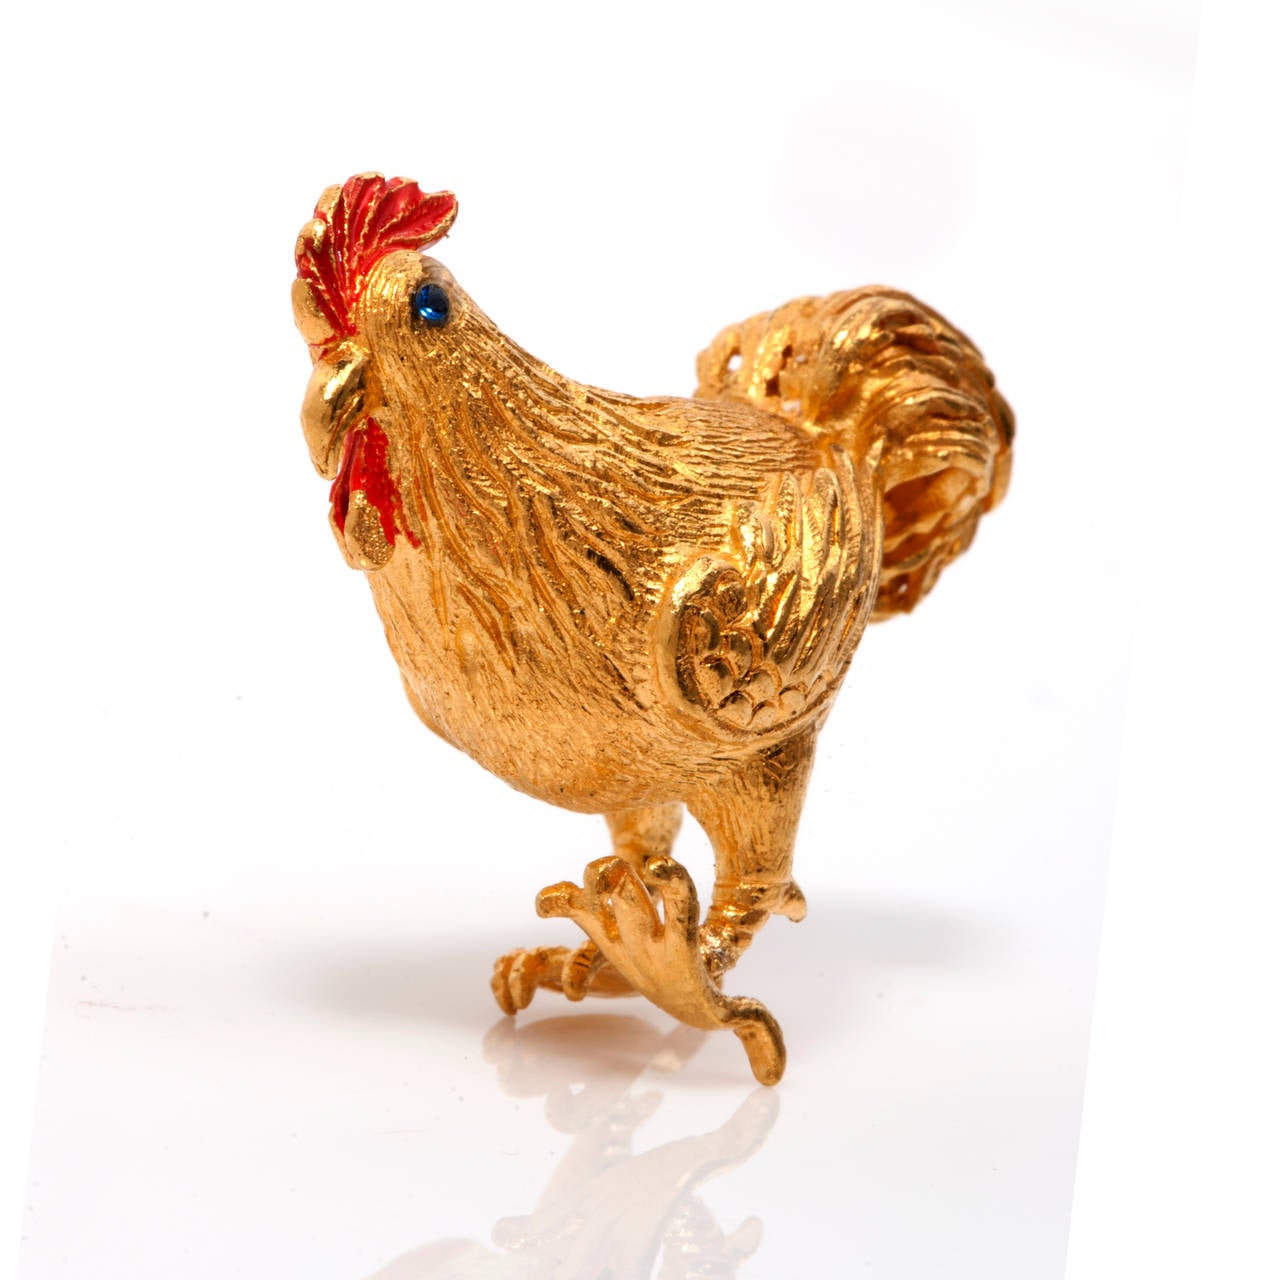 This charming  of a kind antique rooster figurine is full of life and character, a wonderful collectible piece to own! Finely crafted in solid 24k solid pure  gold, it features a remarkable rooster rendered in great detail, with 2 genuine round cut